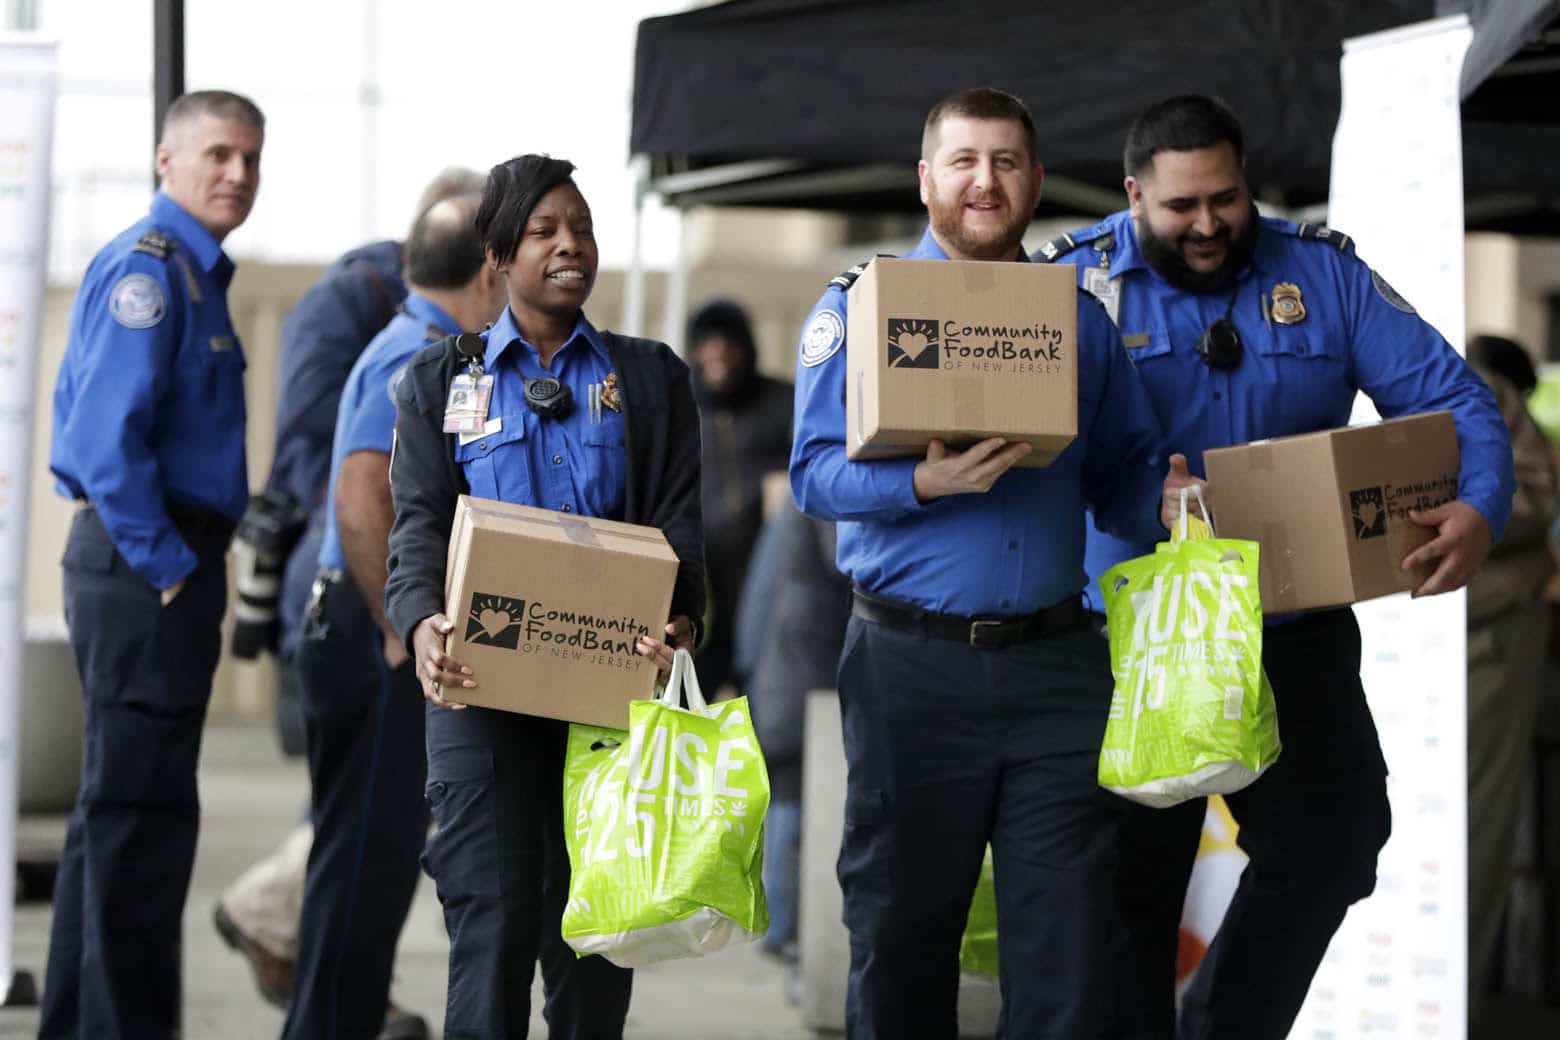 Transportation Security Administration employees carry boxes of non perishables and bags of produce received from the Community Food Bank at a drive at Newark Liberty International Airport to help government employees who are working without pay during the partial government shutdown, Wednesday, Jan. 23, 2019, in Newark, N.J. (AP Photo/Julio Cortez)